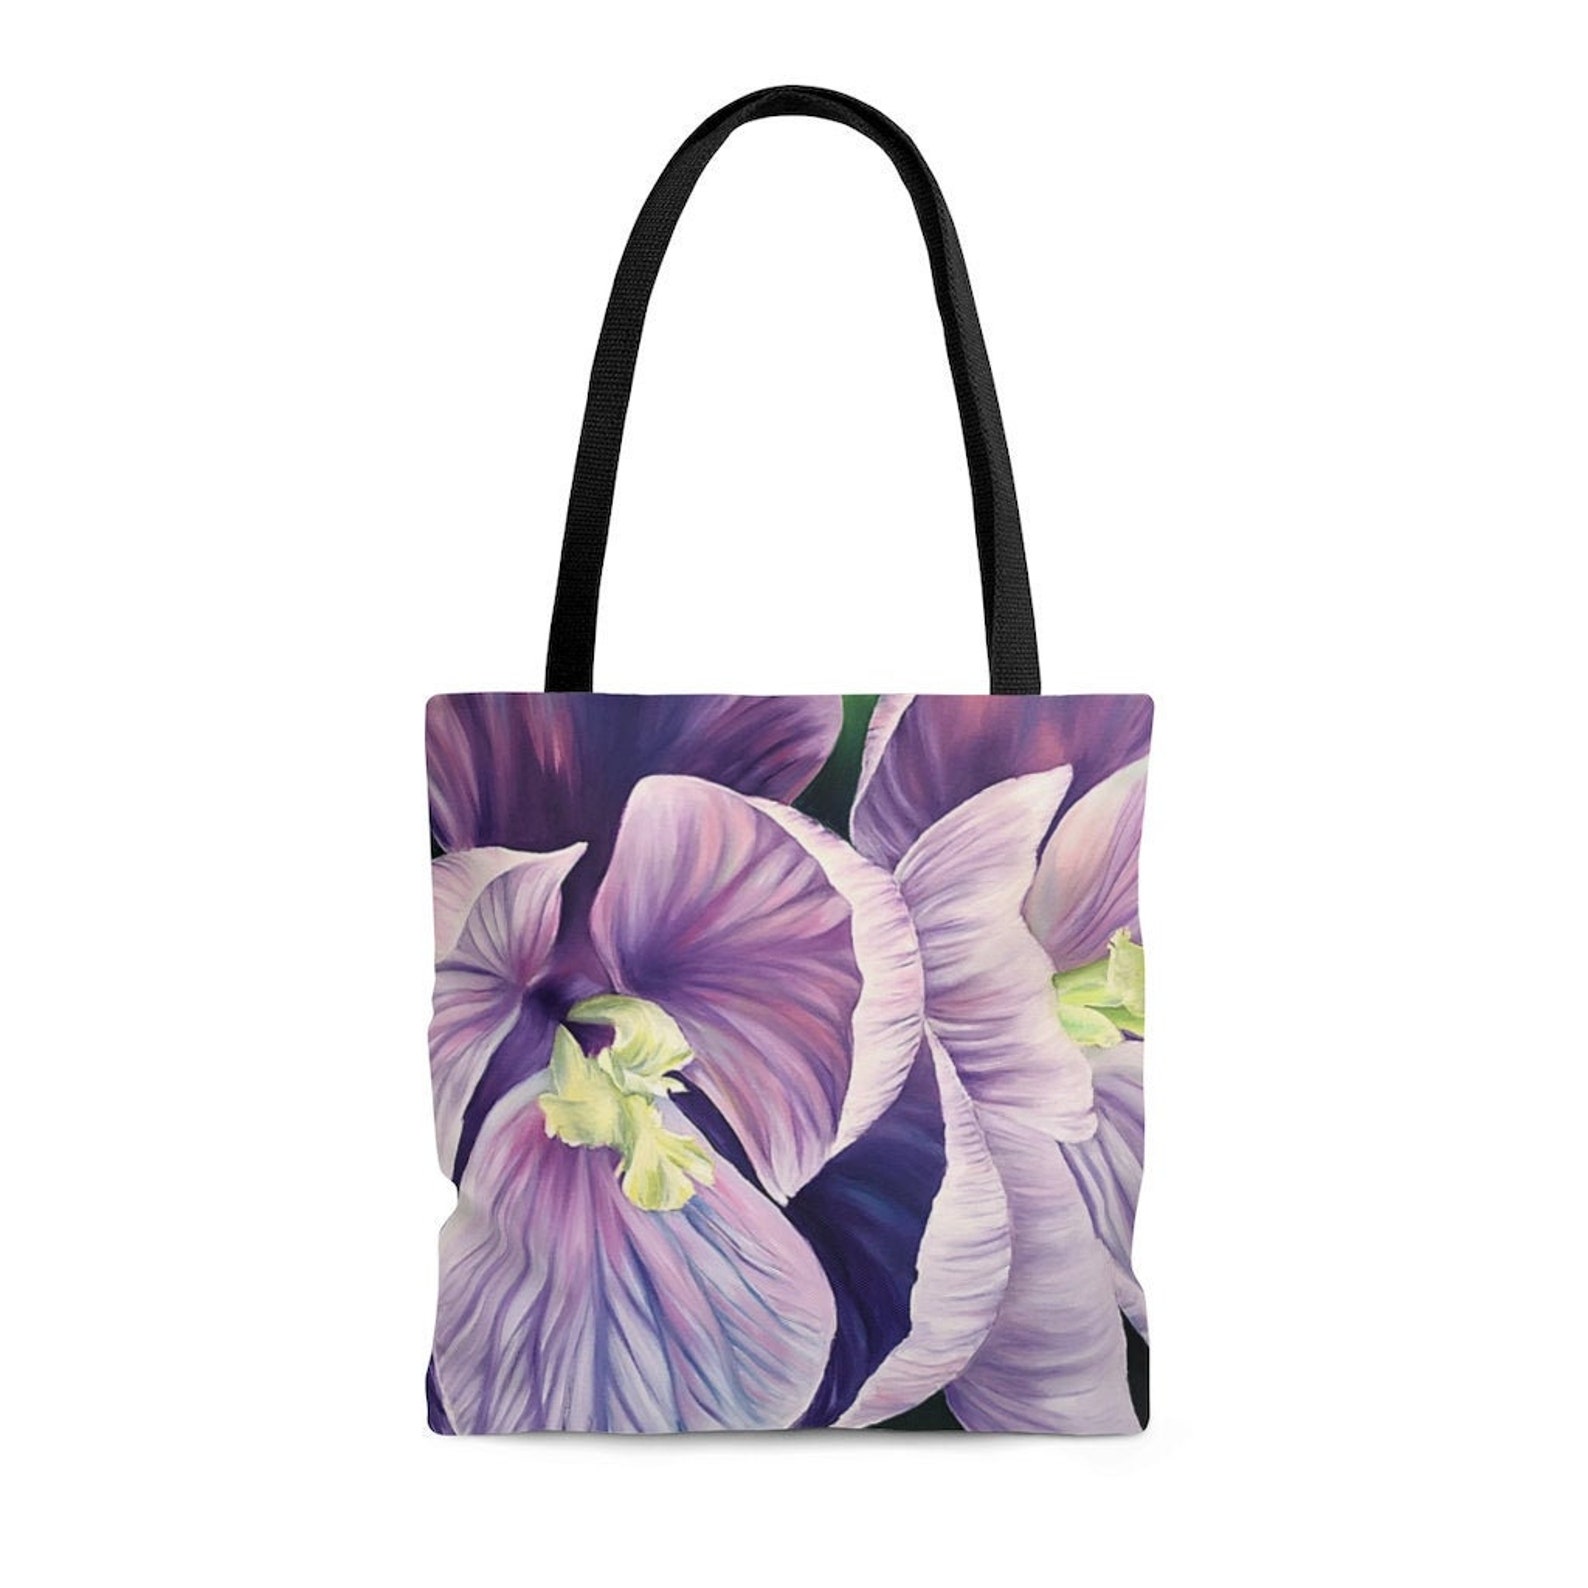 Gift Ready Purple Floral Tote Bag Shopping Tote for Work - Etsy UK